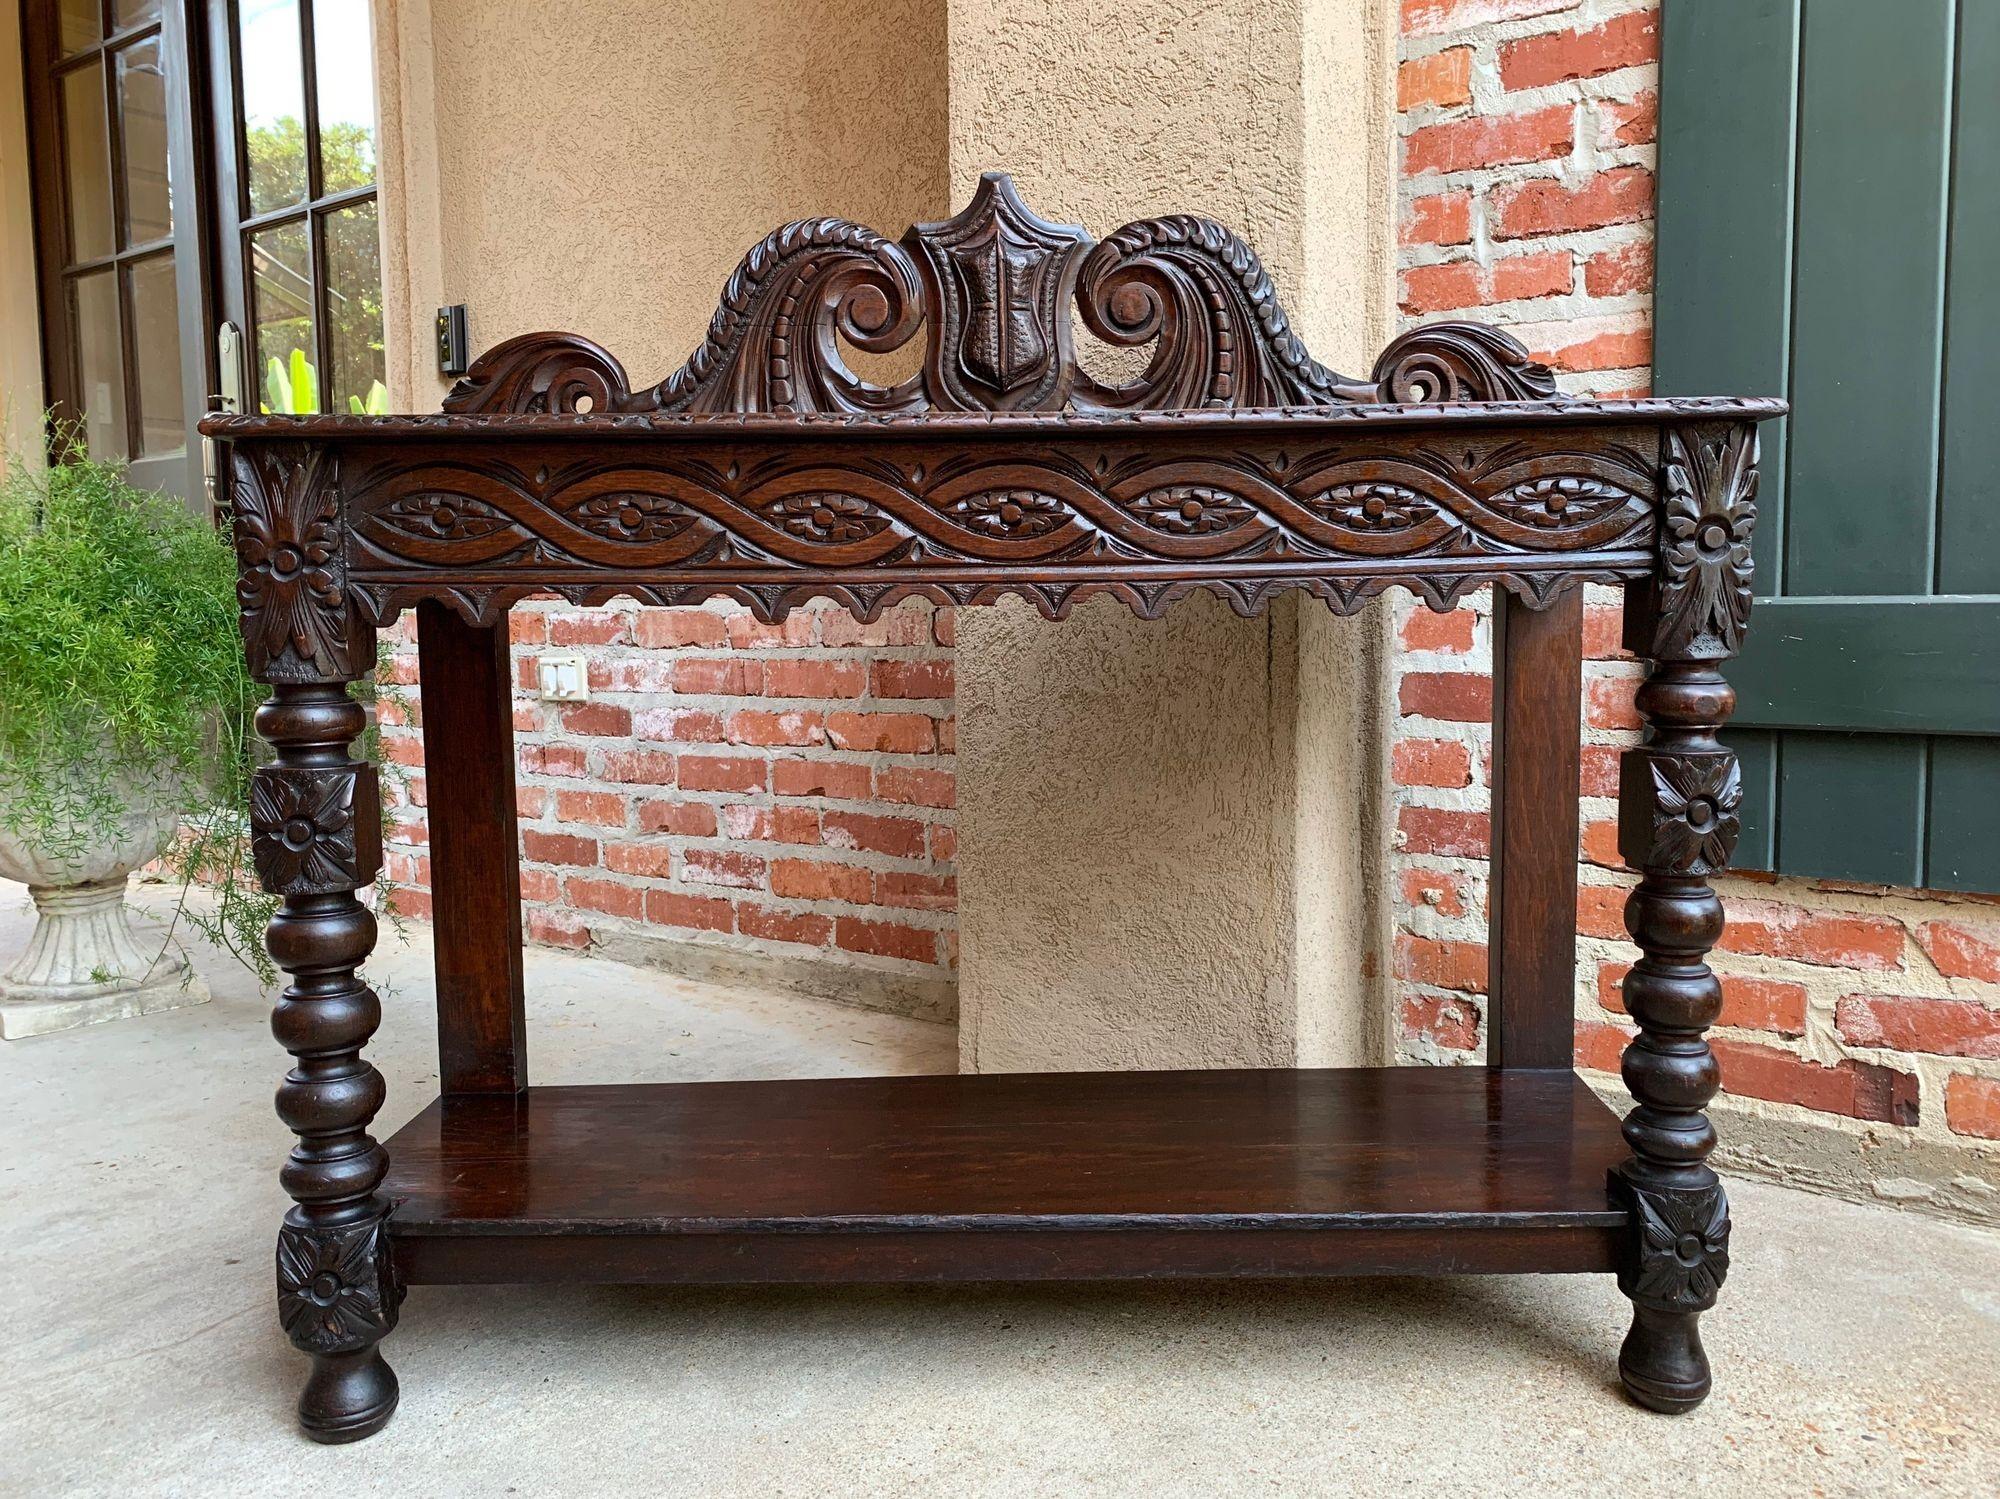 Direct from England, a stunning antique English hall table or sideboard with gorgeous hand carvings throughout!~
~Huge dimensional carved back crown piece with center shield medallion flanked by large scrolls on either side~
~Wide front apron has